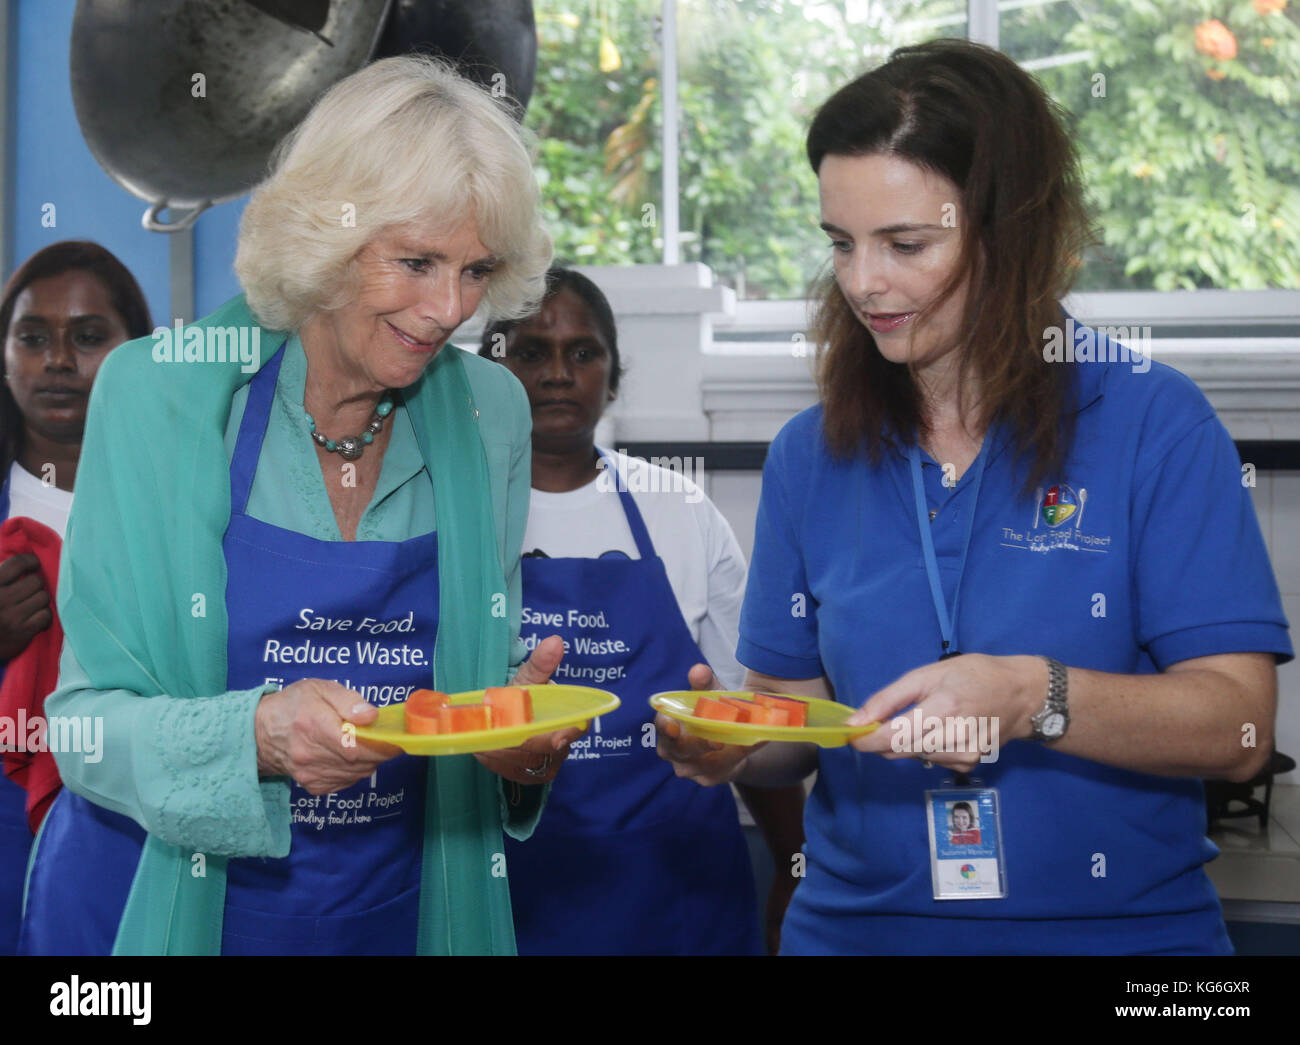 The Duchess of Cornwall (left) and the project's Chairwoman and Founder, Mrs Suzanne Mooney, prepare food for residents of The Lighthouse Children's Welfare Centre, during her visit to The Lost Food Project - the first professional food bank in Malaysia, reclaiming high quality surplus food from supermarkets and manufacturers, sorting and distributing them to a wide variety of charities on a non-discriminatory basis - in Kuala Lumpur, Malaysia. The Lighthouse Children's Welfare Home houses 60 disadvantaged children, aged one to 18 years old. Stock Photo